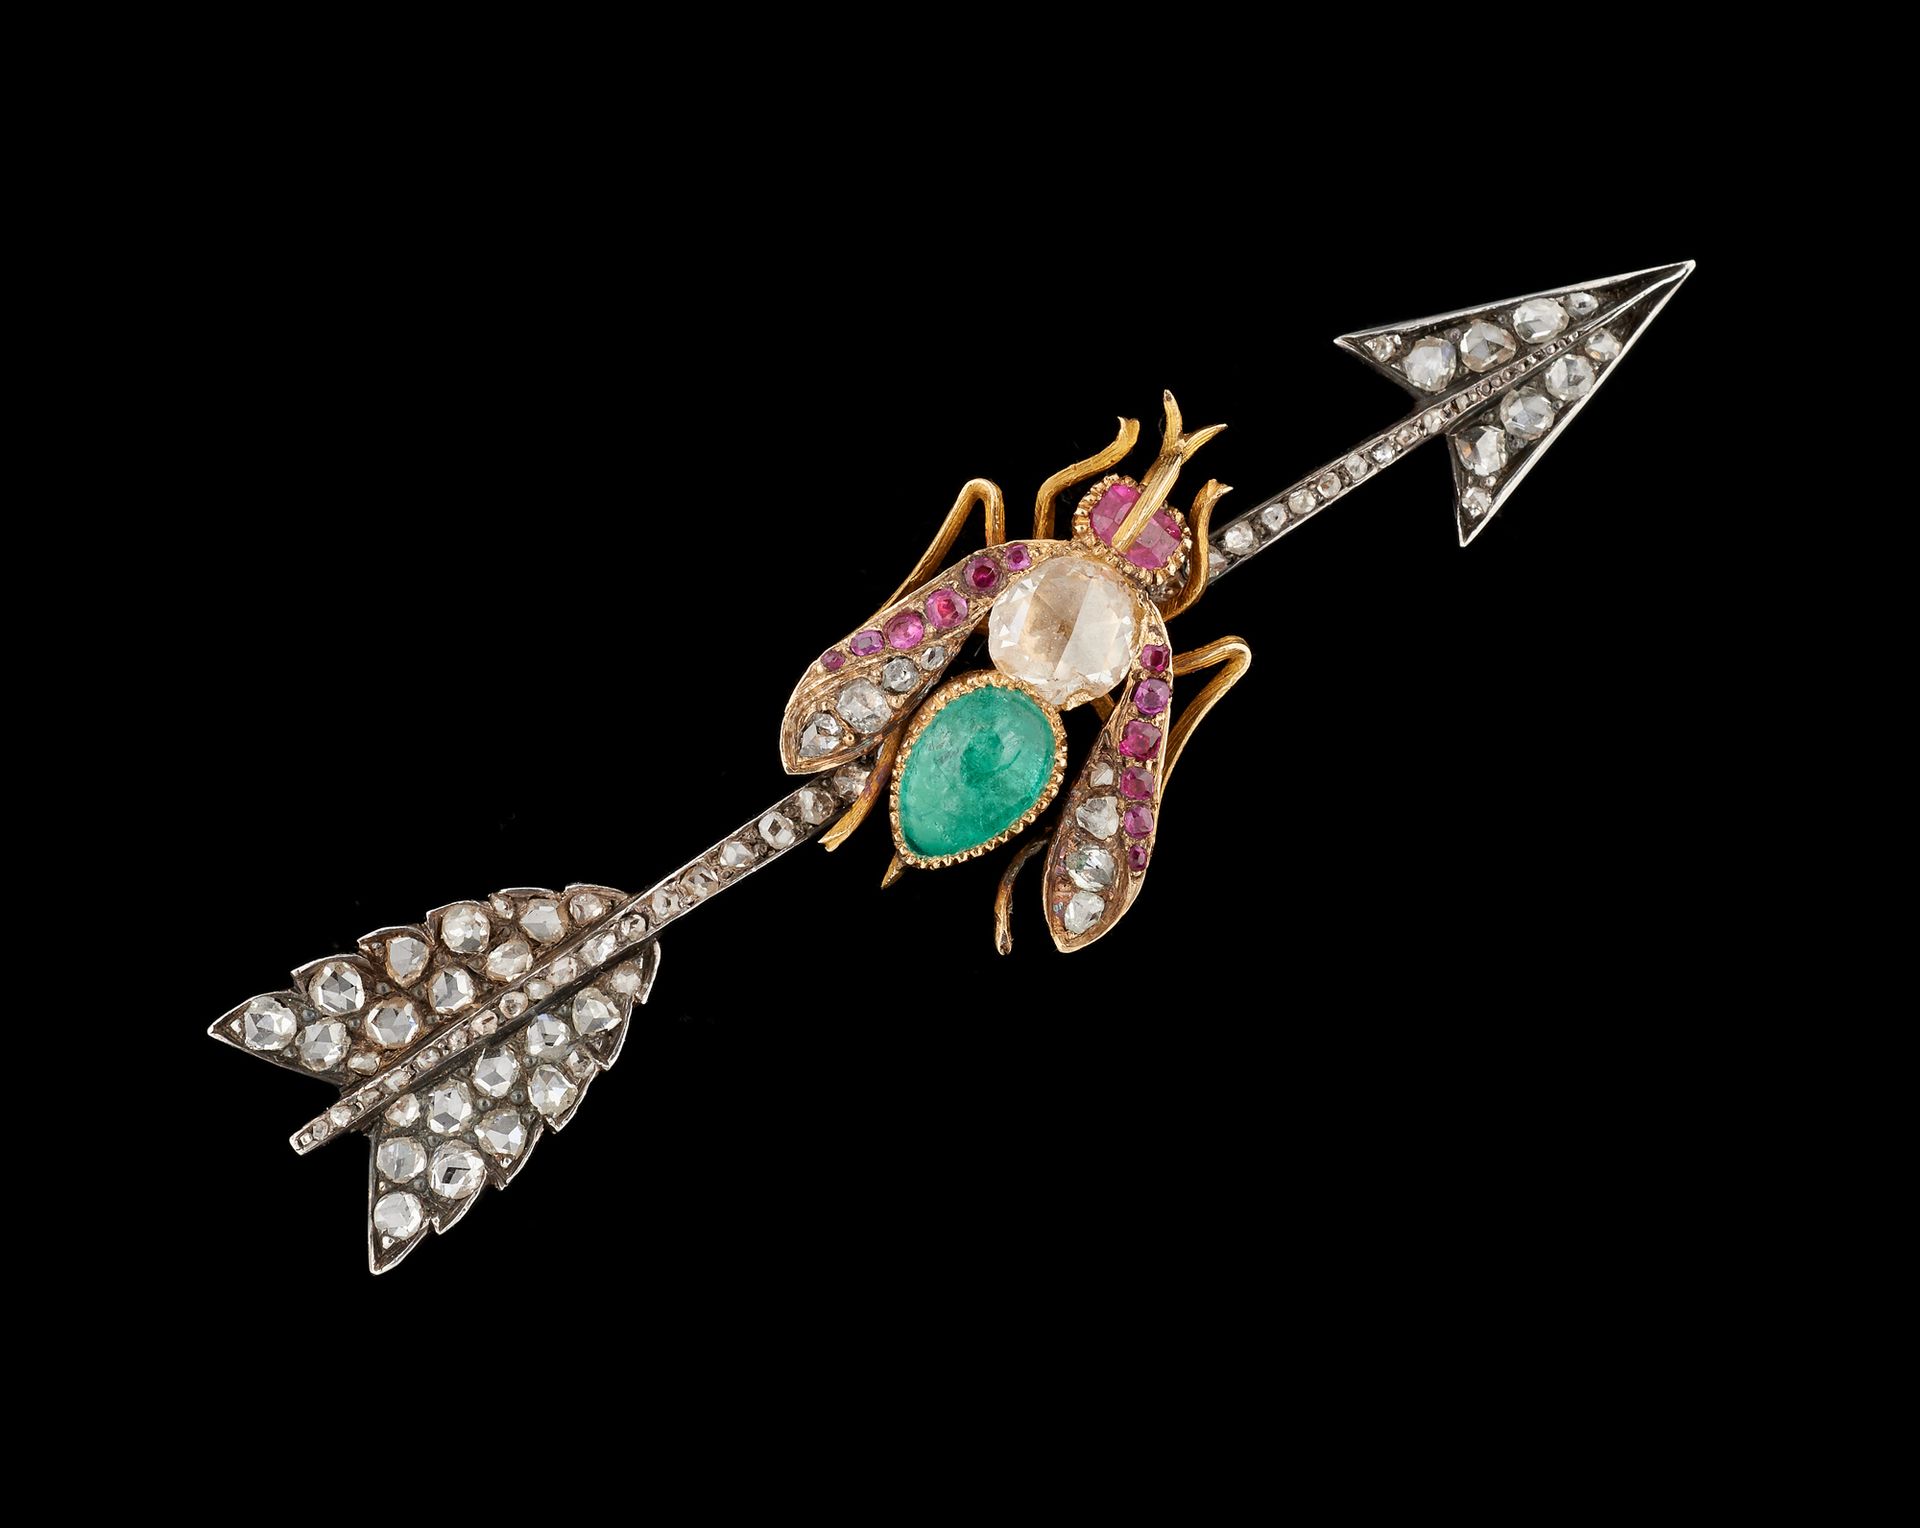 Joaillerie. 
Jewel: Silver and gold brooch with an emerald cabochon, rubies and &hellip;